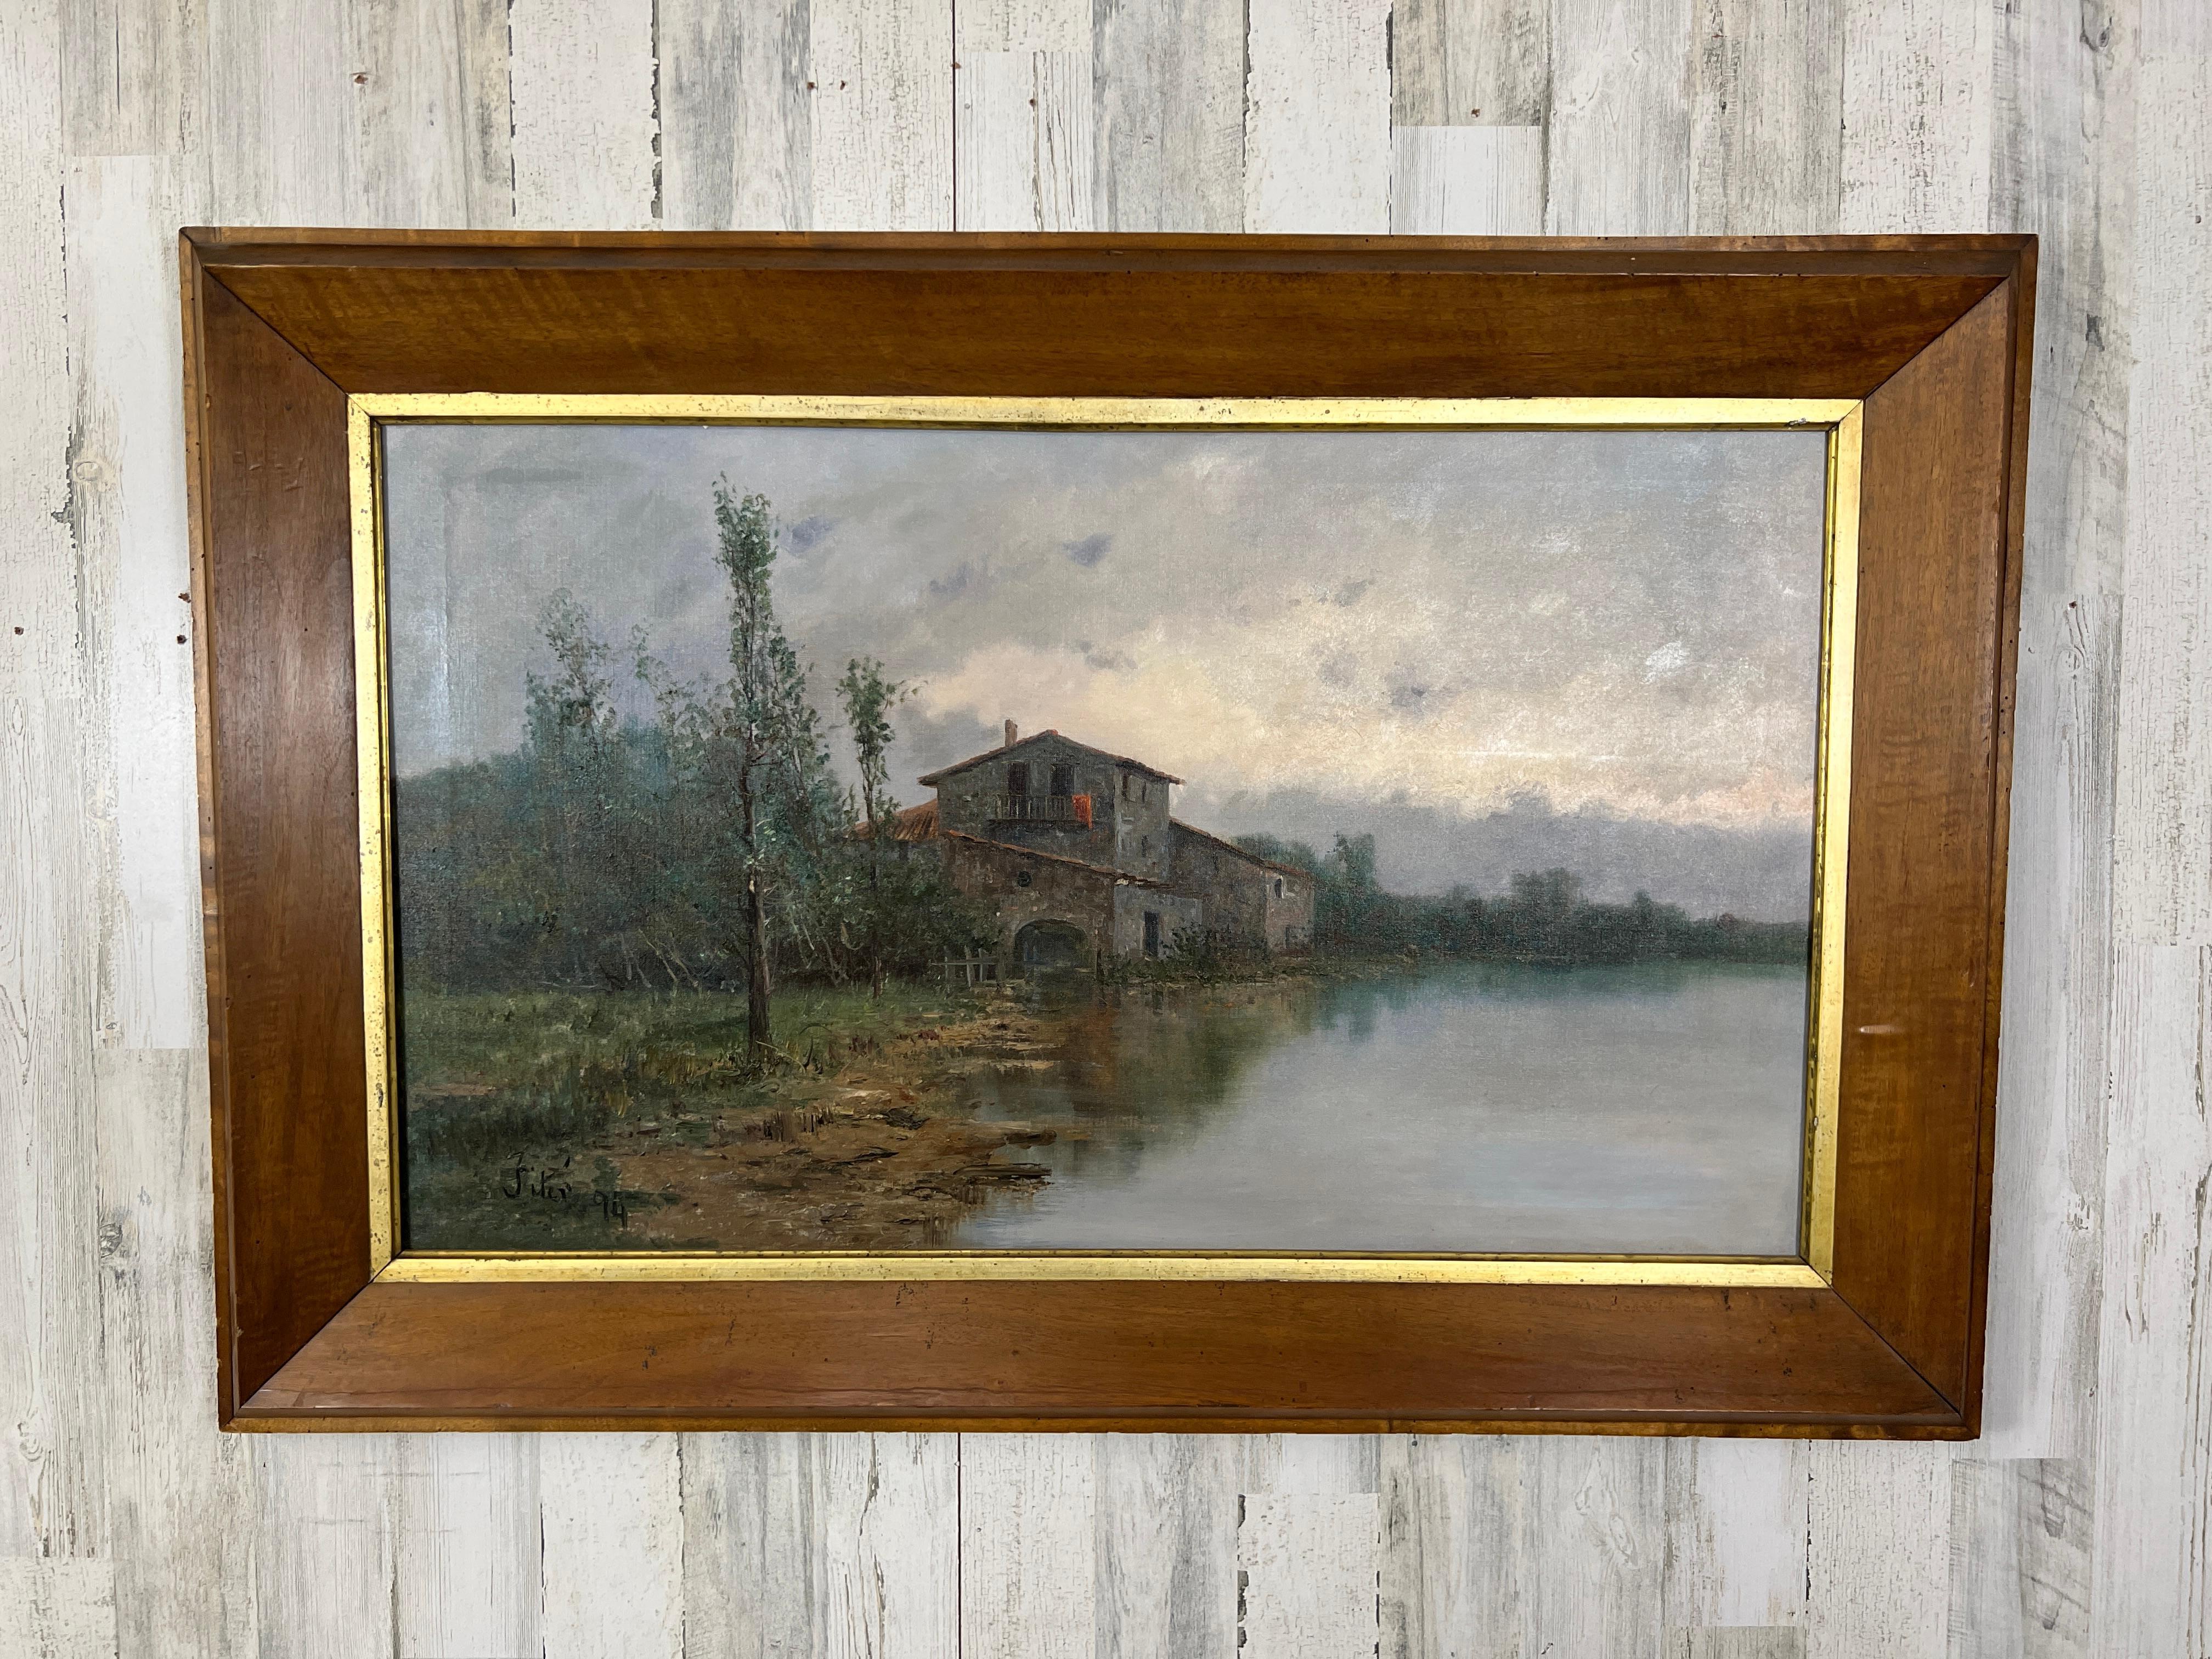 Antique 19th century country French lake house oil on canvas painting with walnut frame
Signed Fiter.